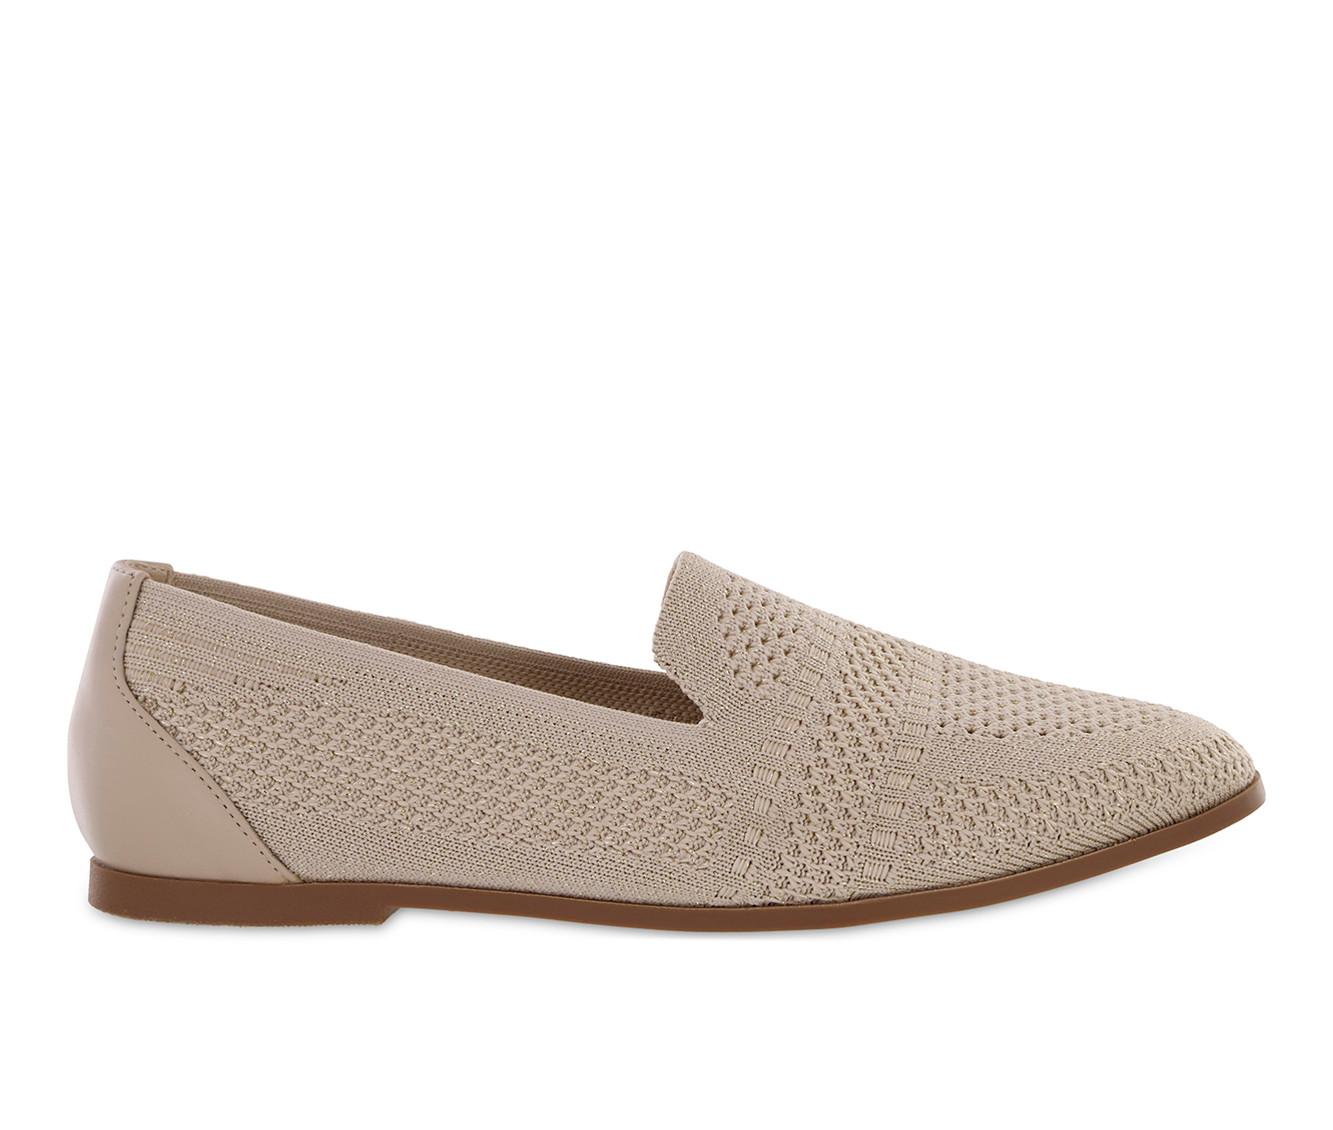 Women's Mia Amore Luvie Loafers